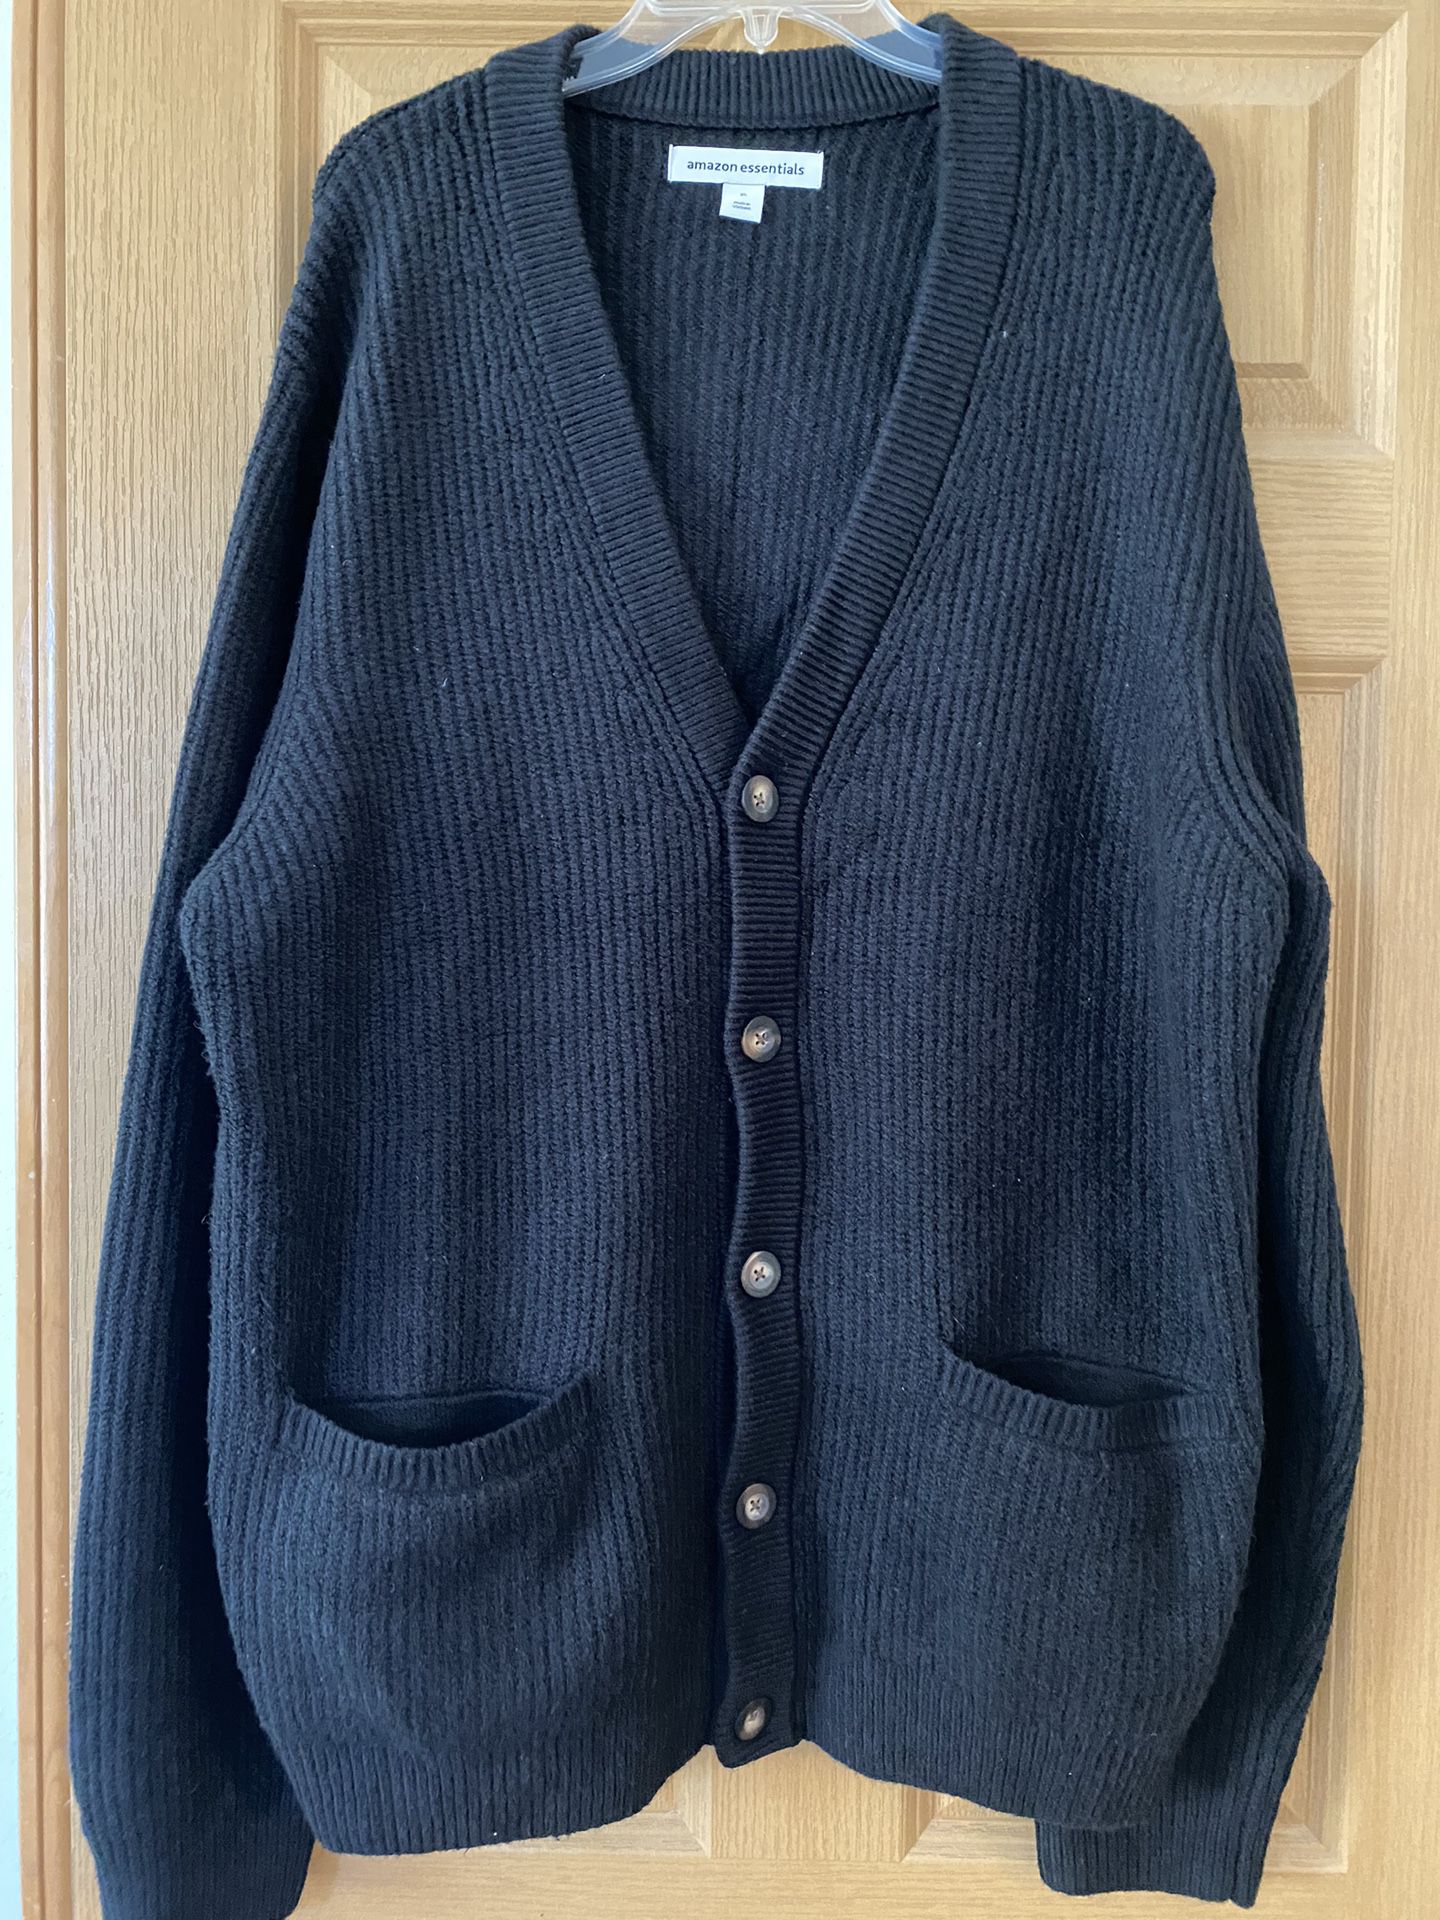 Men’s Size XL Black Cable Knit Cardigan Sweater - Buttons - Pockets - Heavy & Warm - Soft